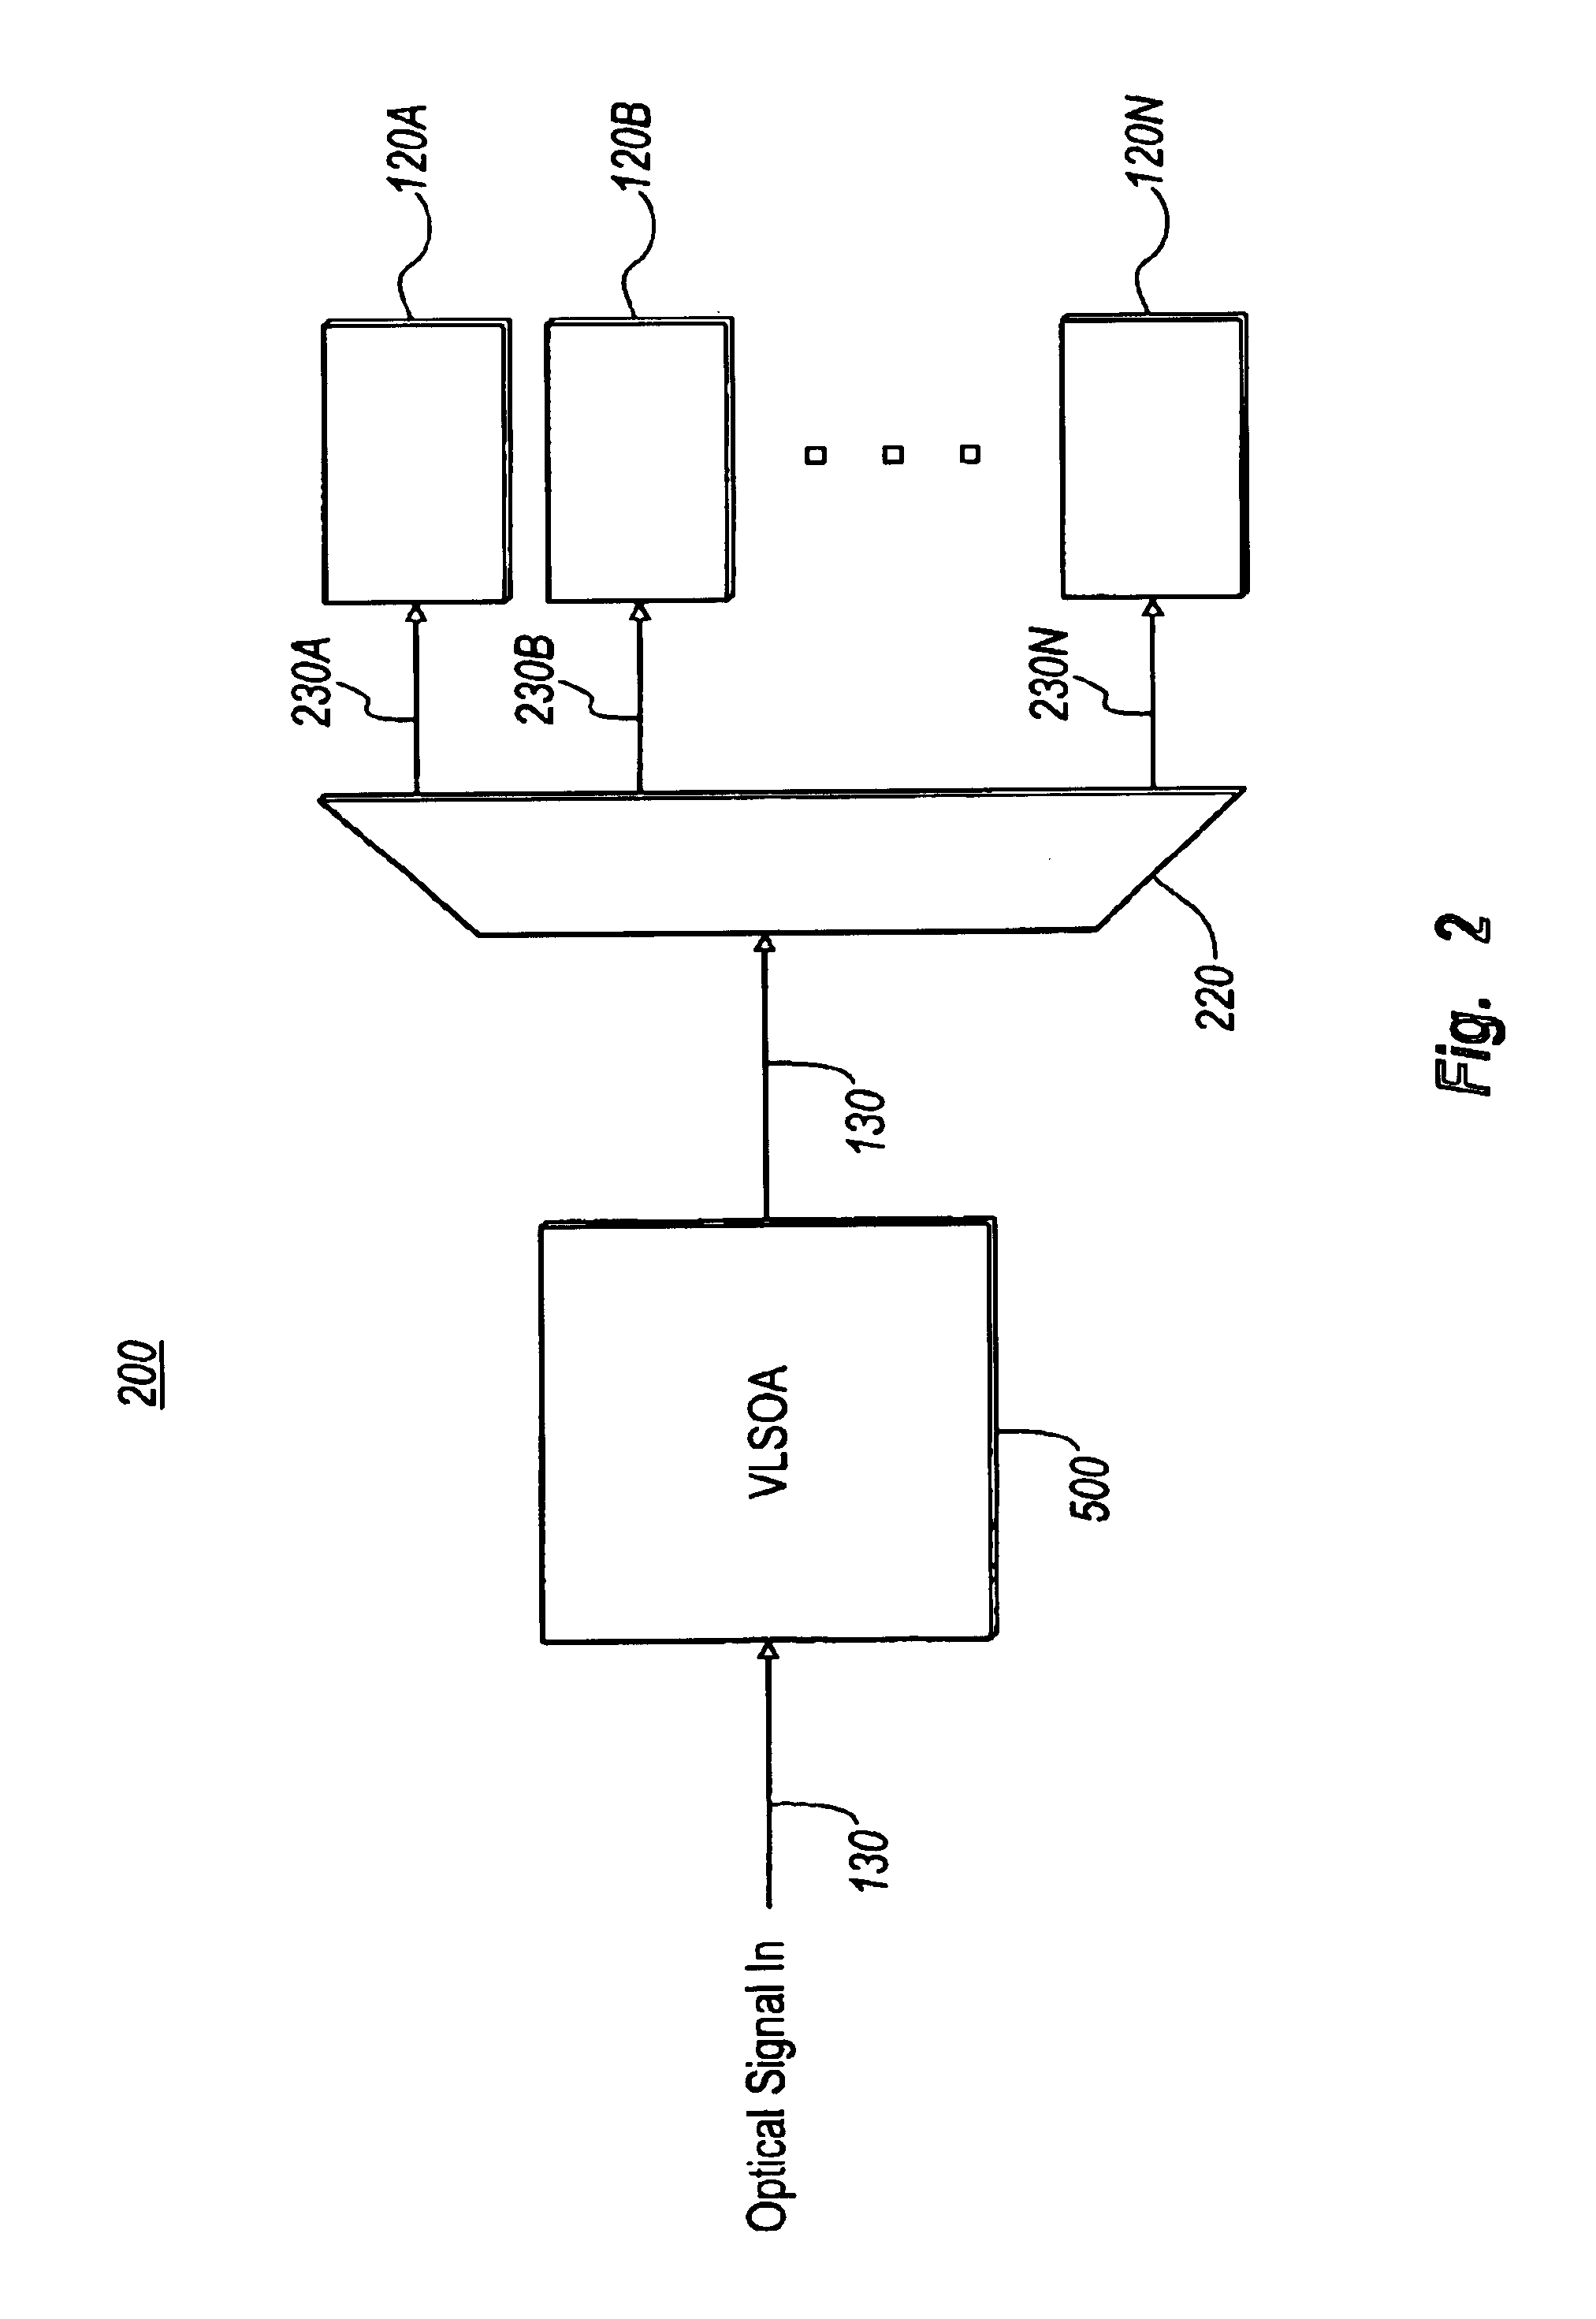 Optical receiver including a linear semiconductor optical amplifier